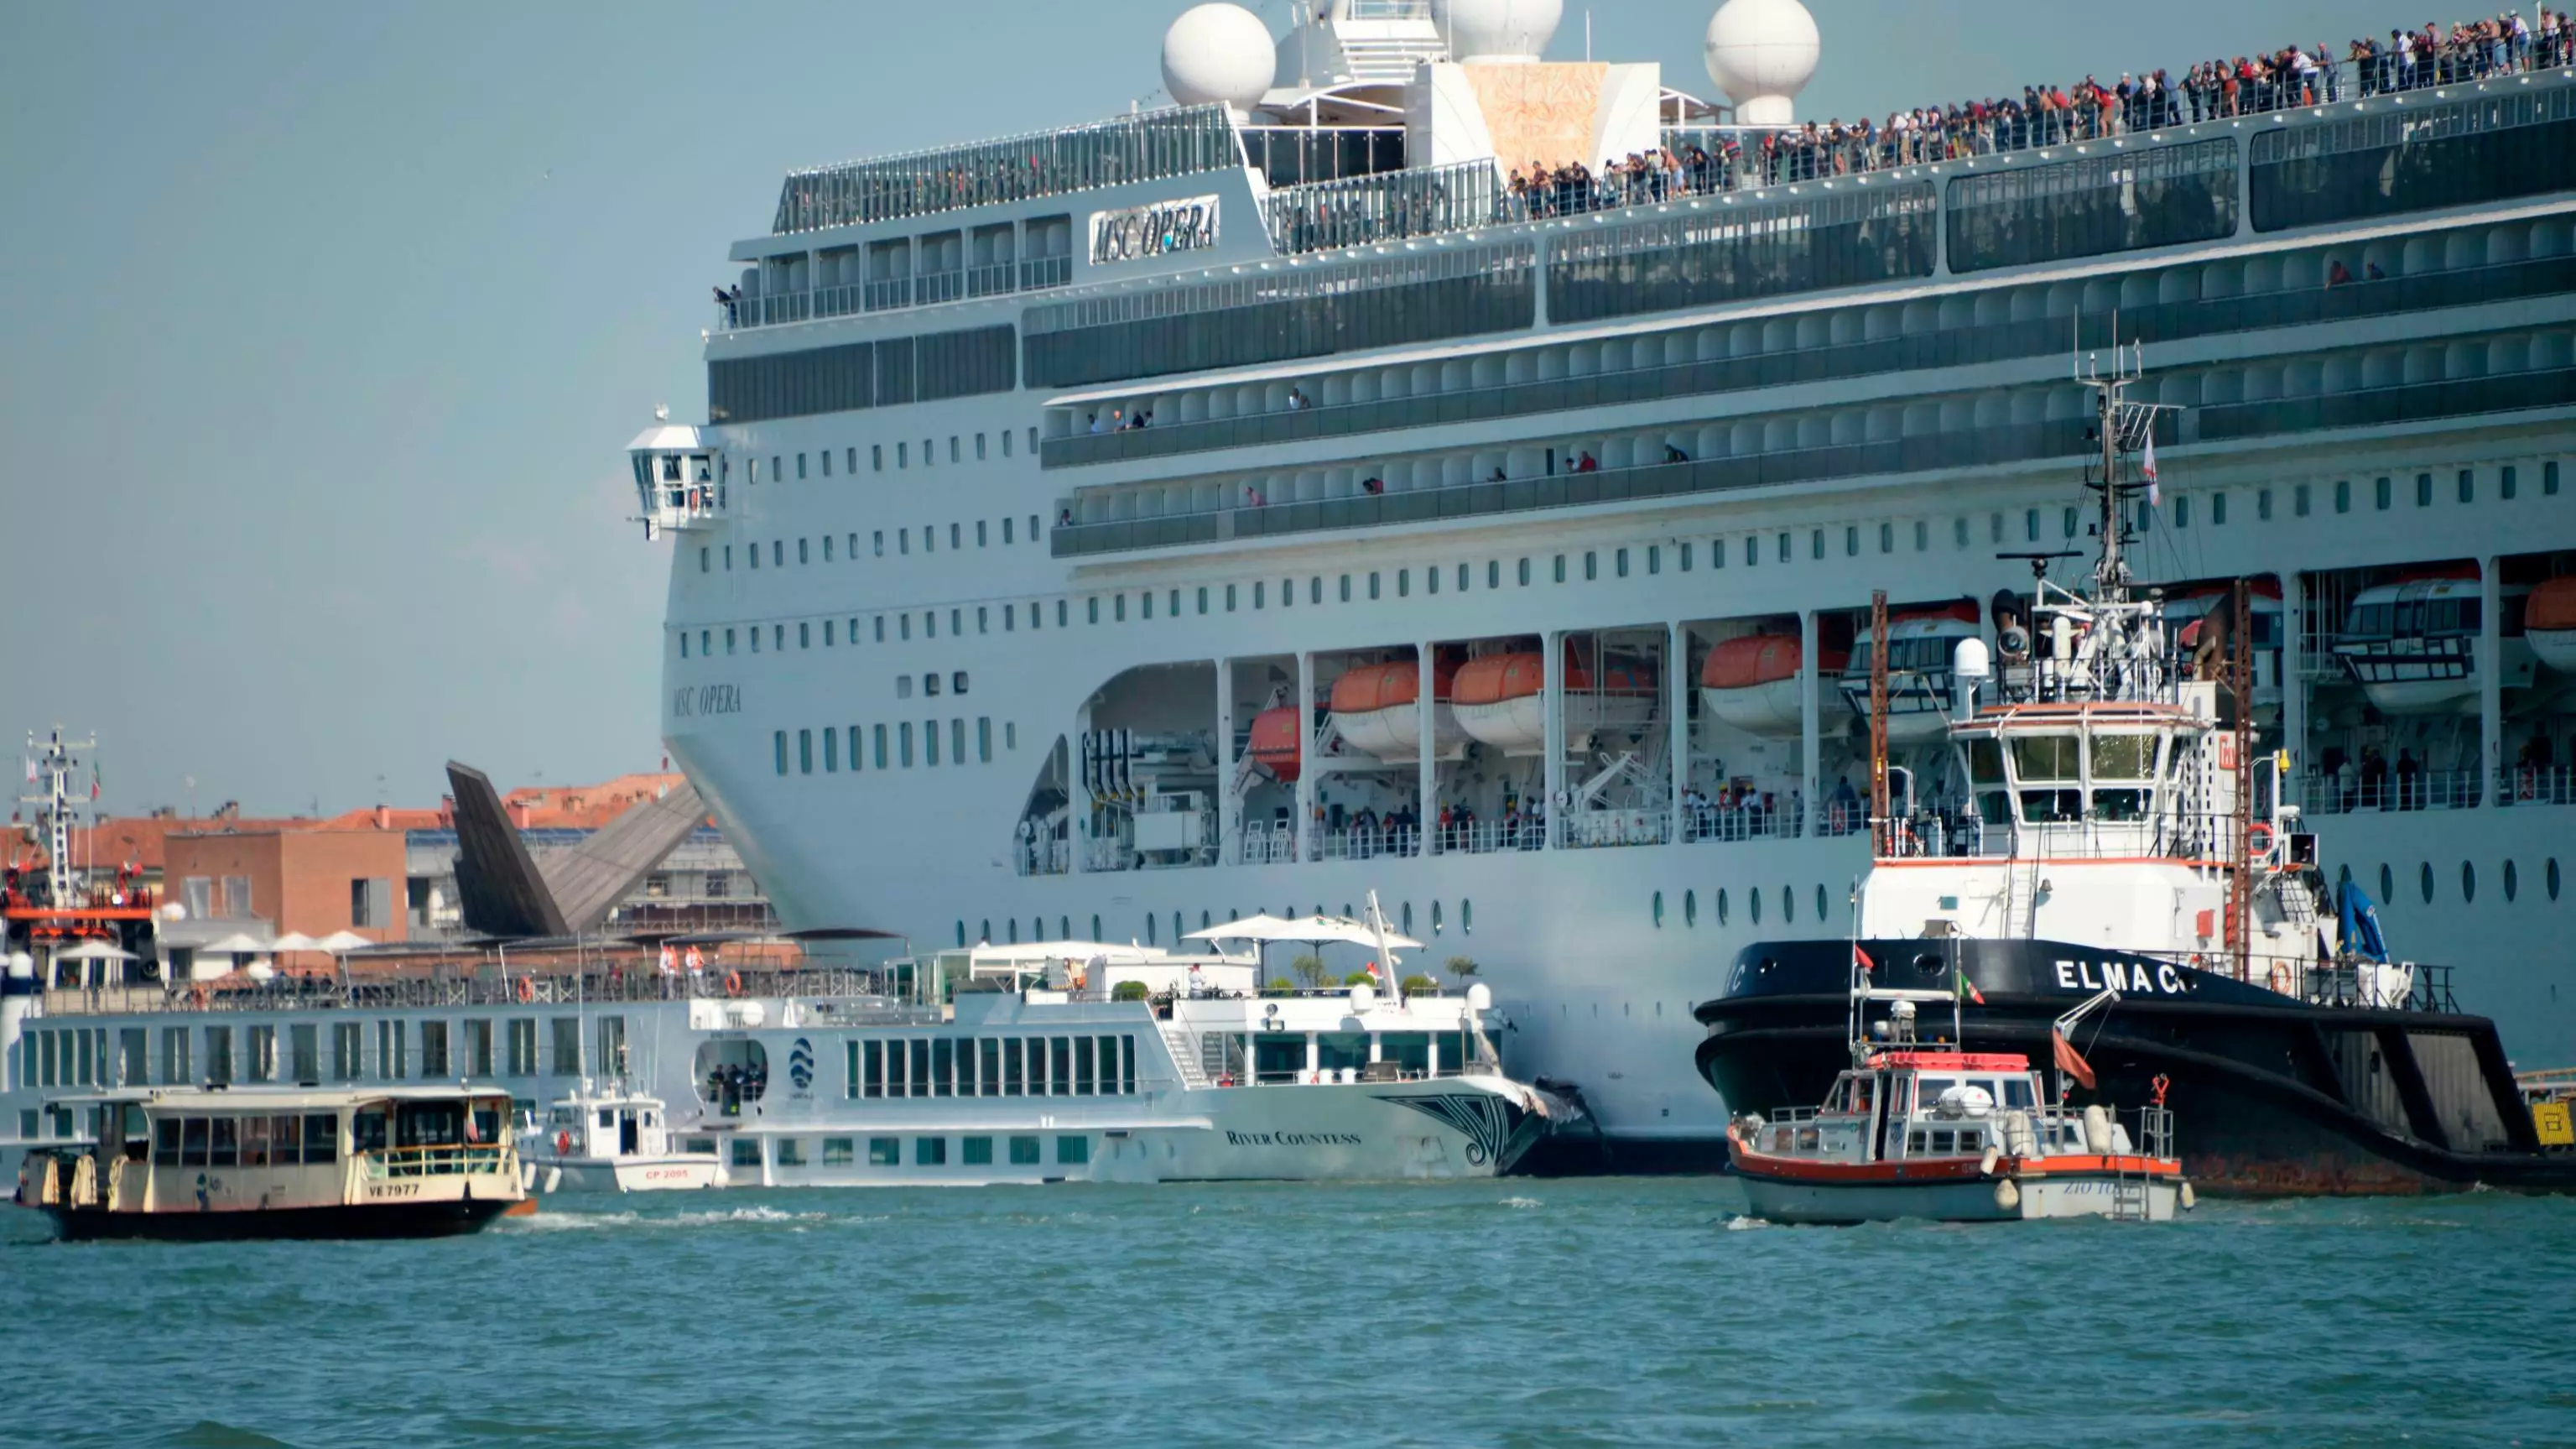 Cruise Ship Injures Five People As It Crashes Into Tourist Boat In Venice